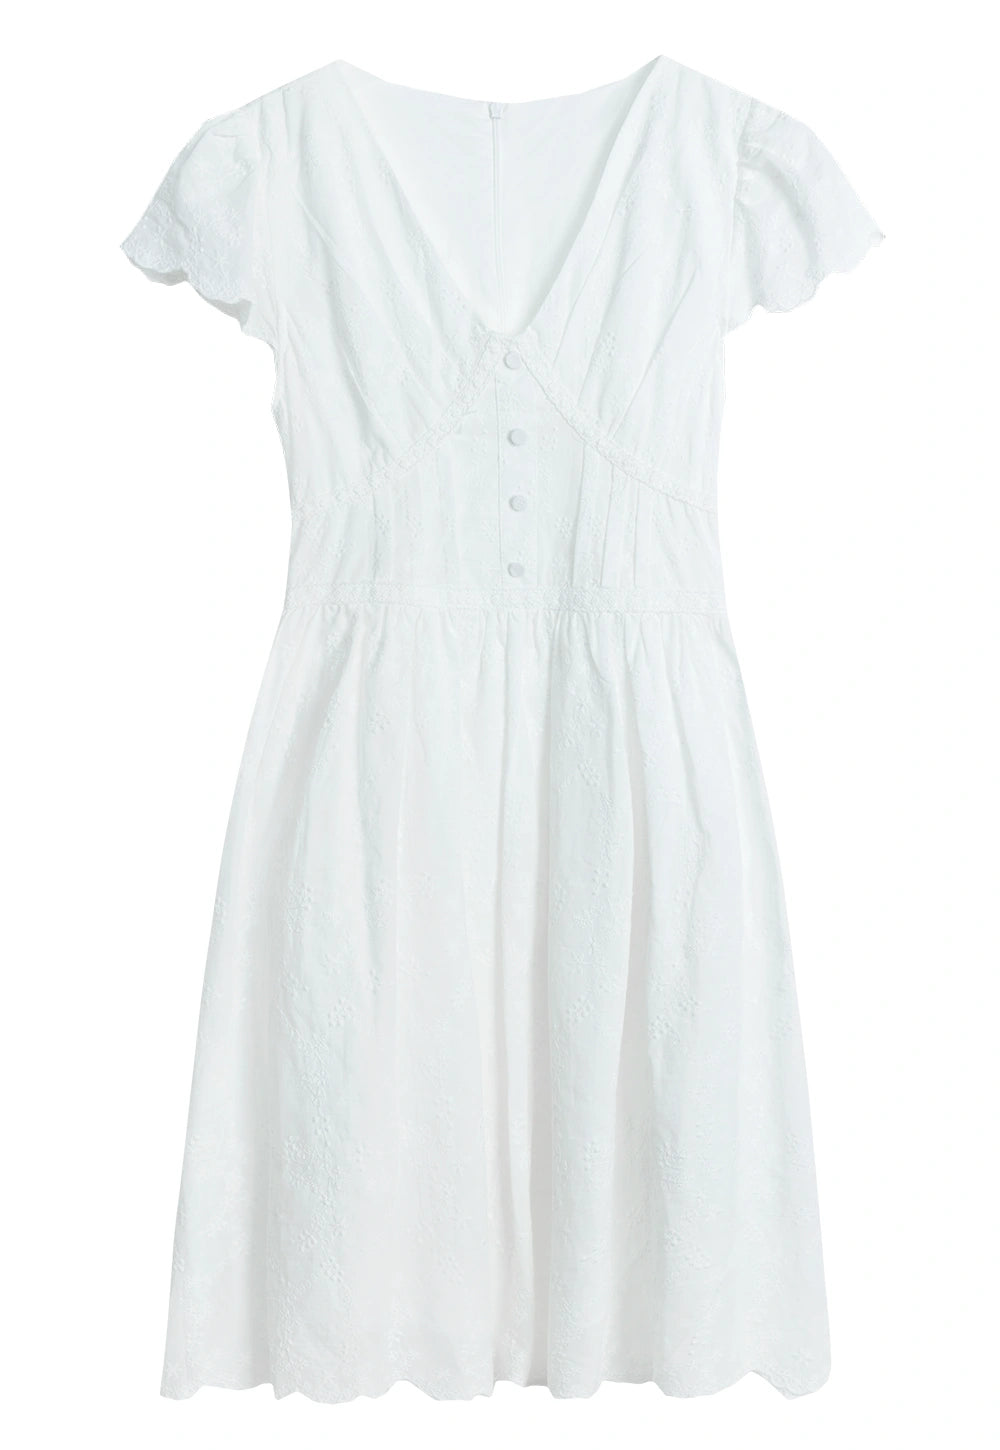 Women's Short Sleeve V-Neck Button Front Dress with Lace Detail